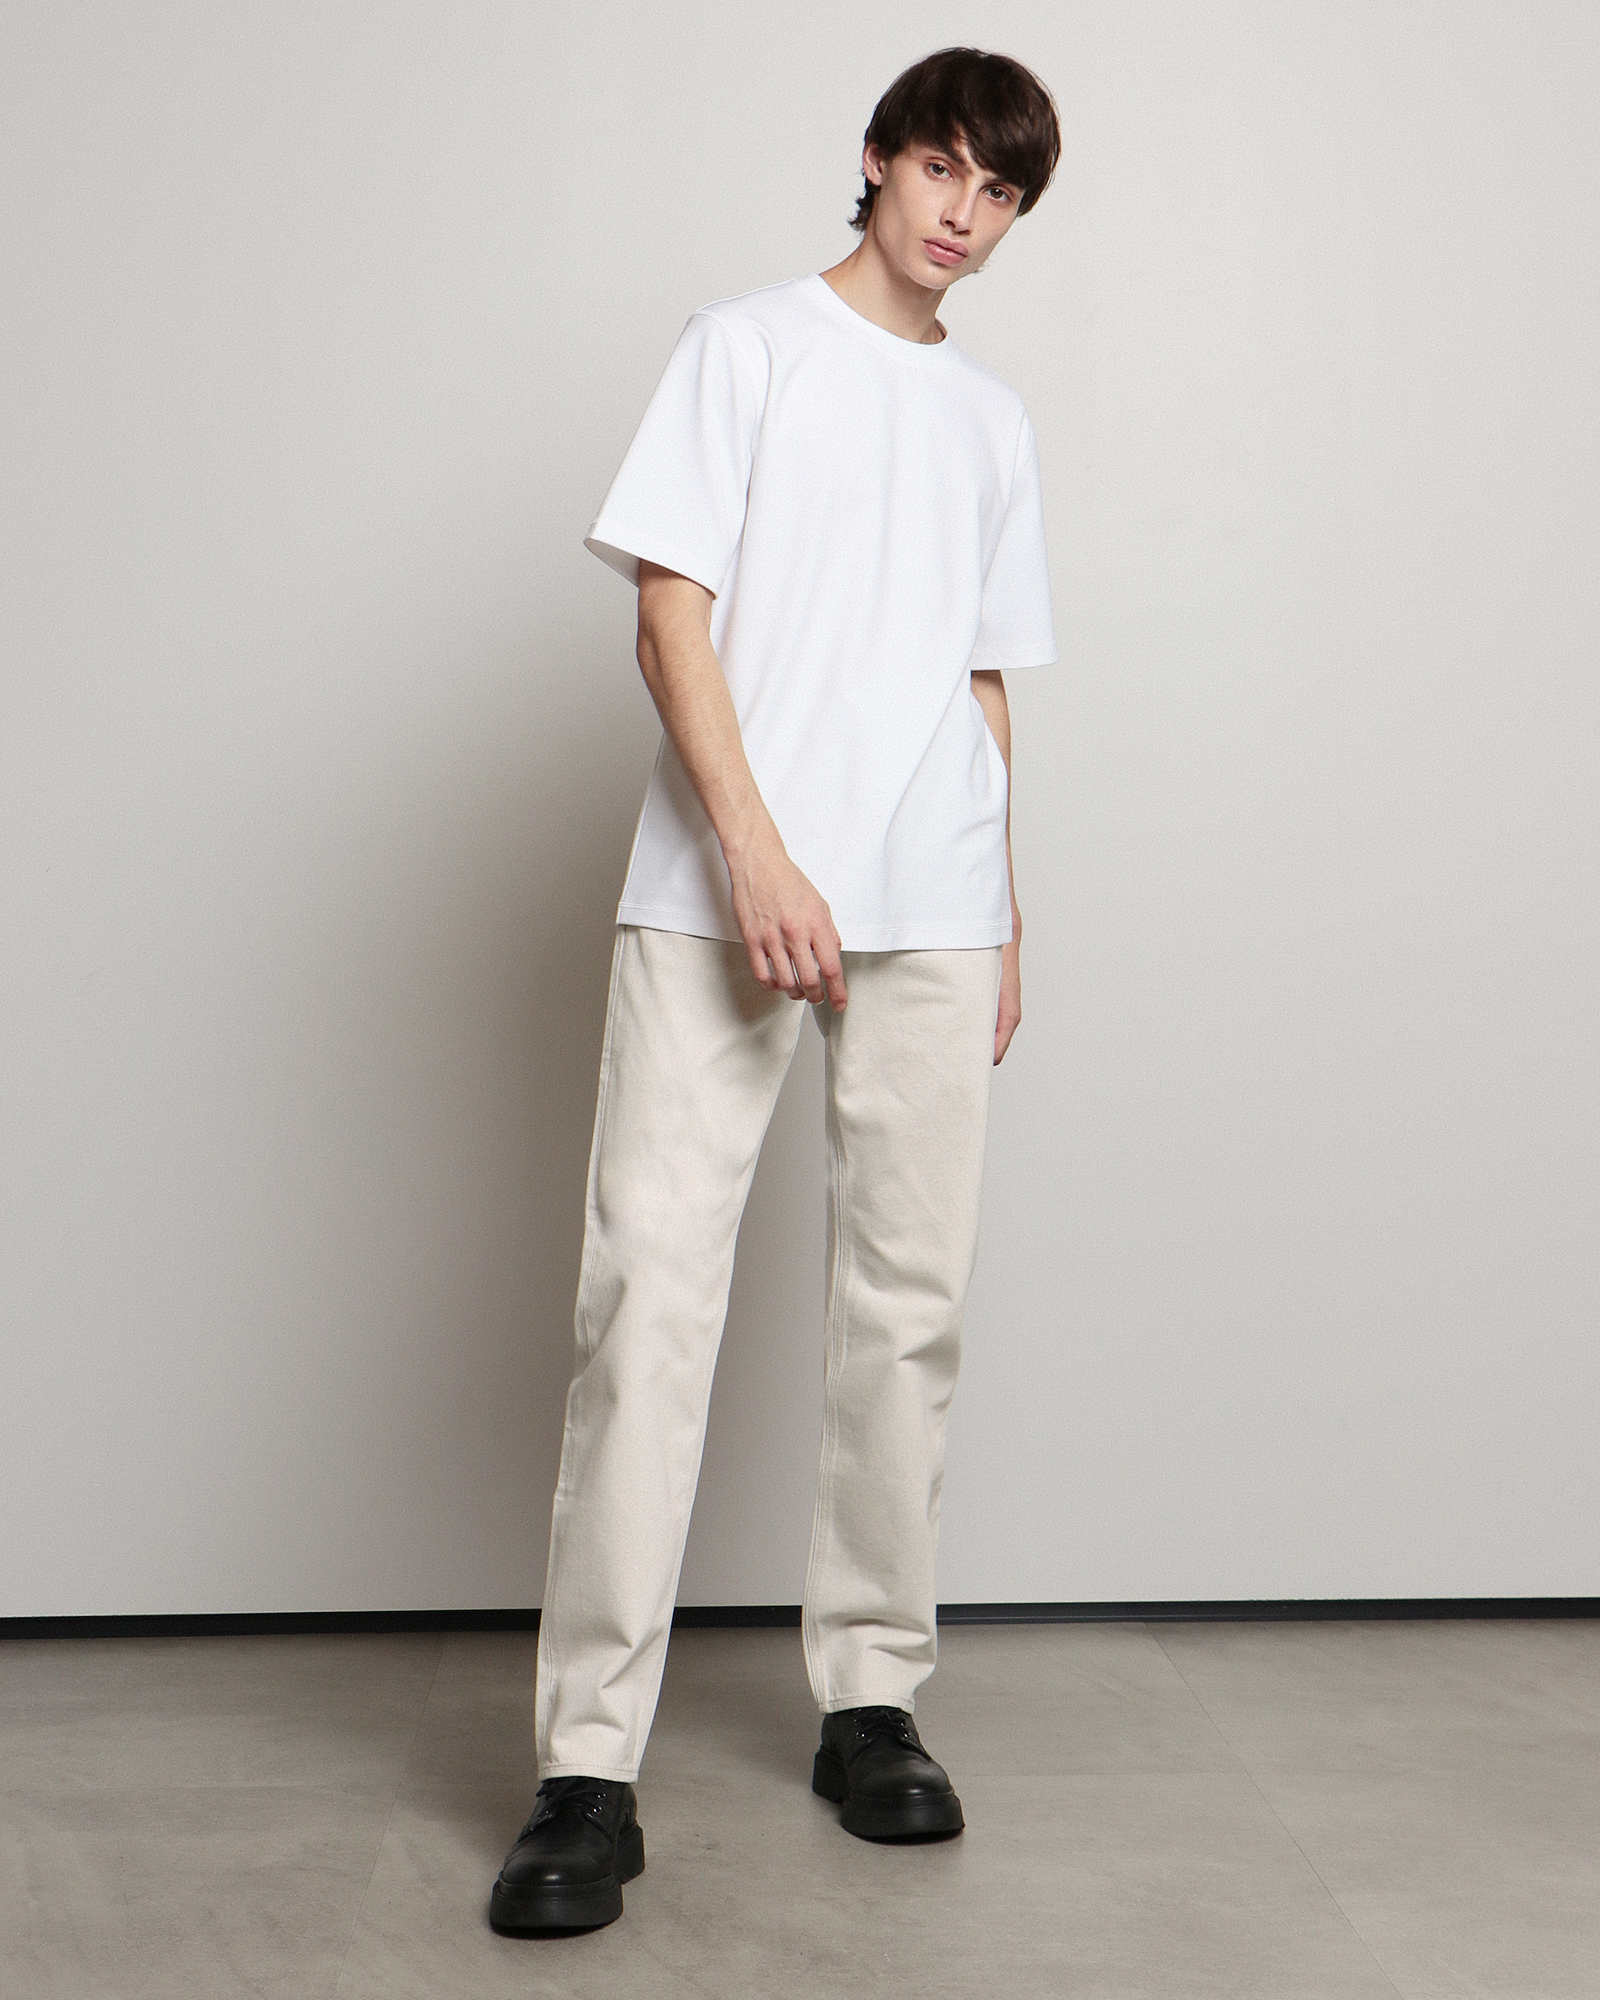 UNIQLO and HELMUT LANG Classic Cut Jeans